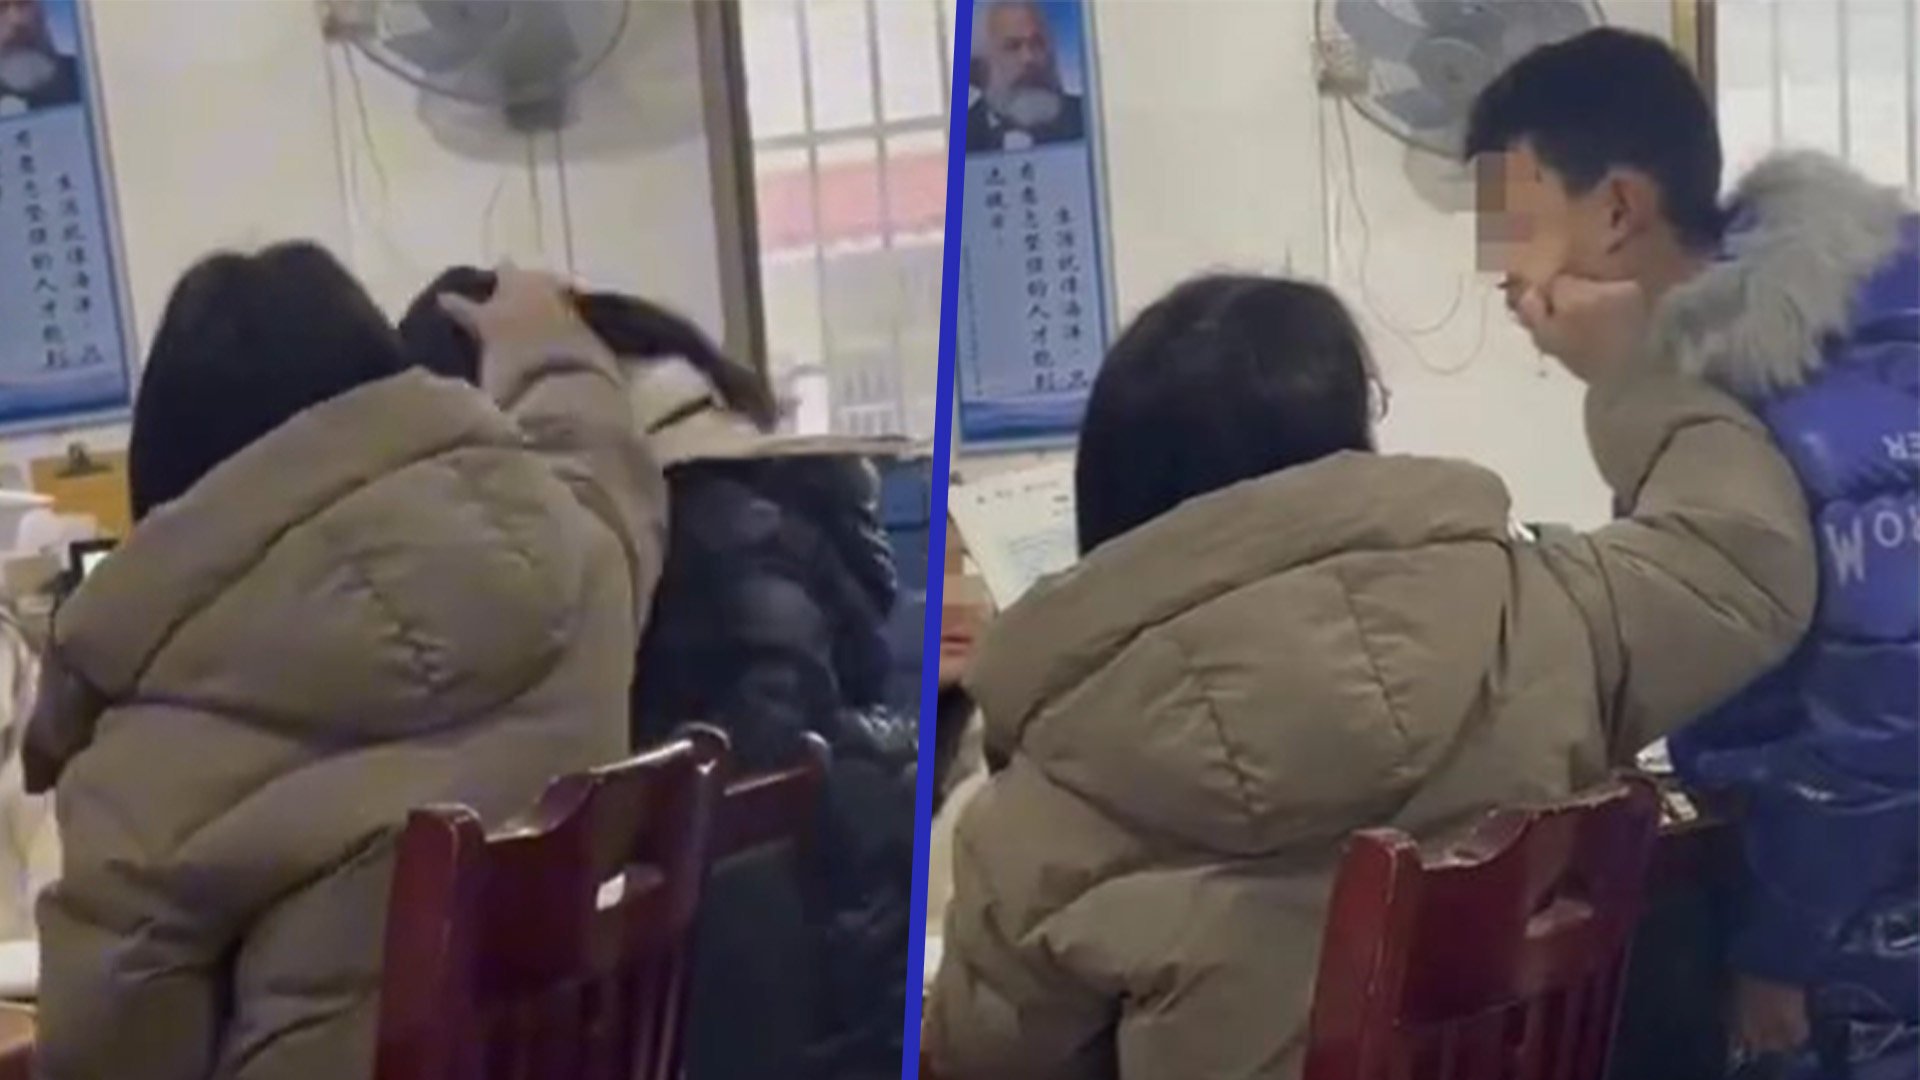 A crazed schoolteacher in China who physically assaulted two of her pupils in a sustained and violent attack has been suspended as police investigate the incident. Photo: SCMP composite/Douyin